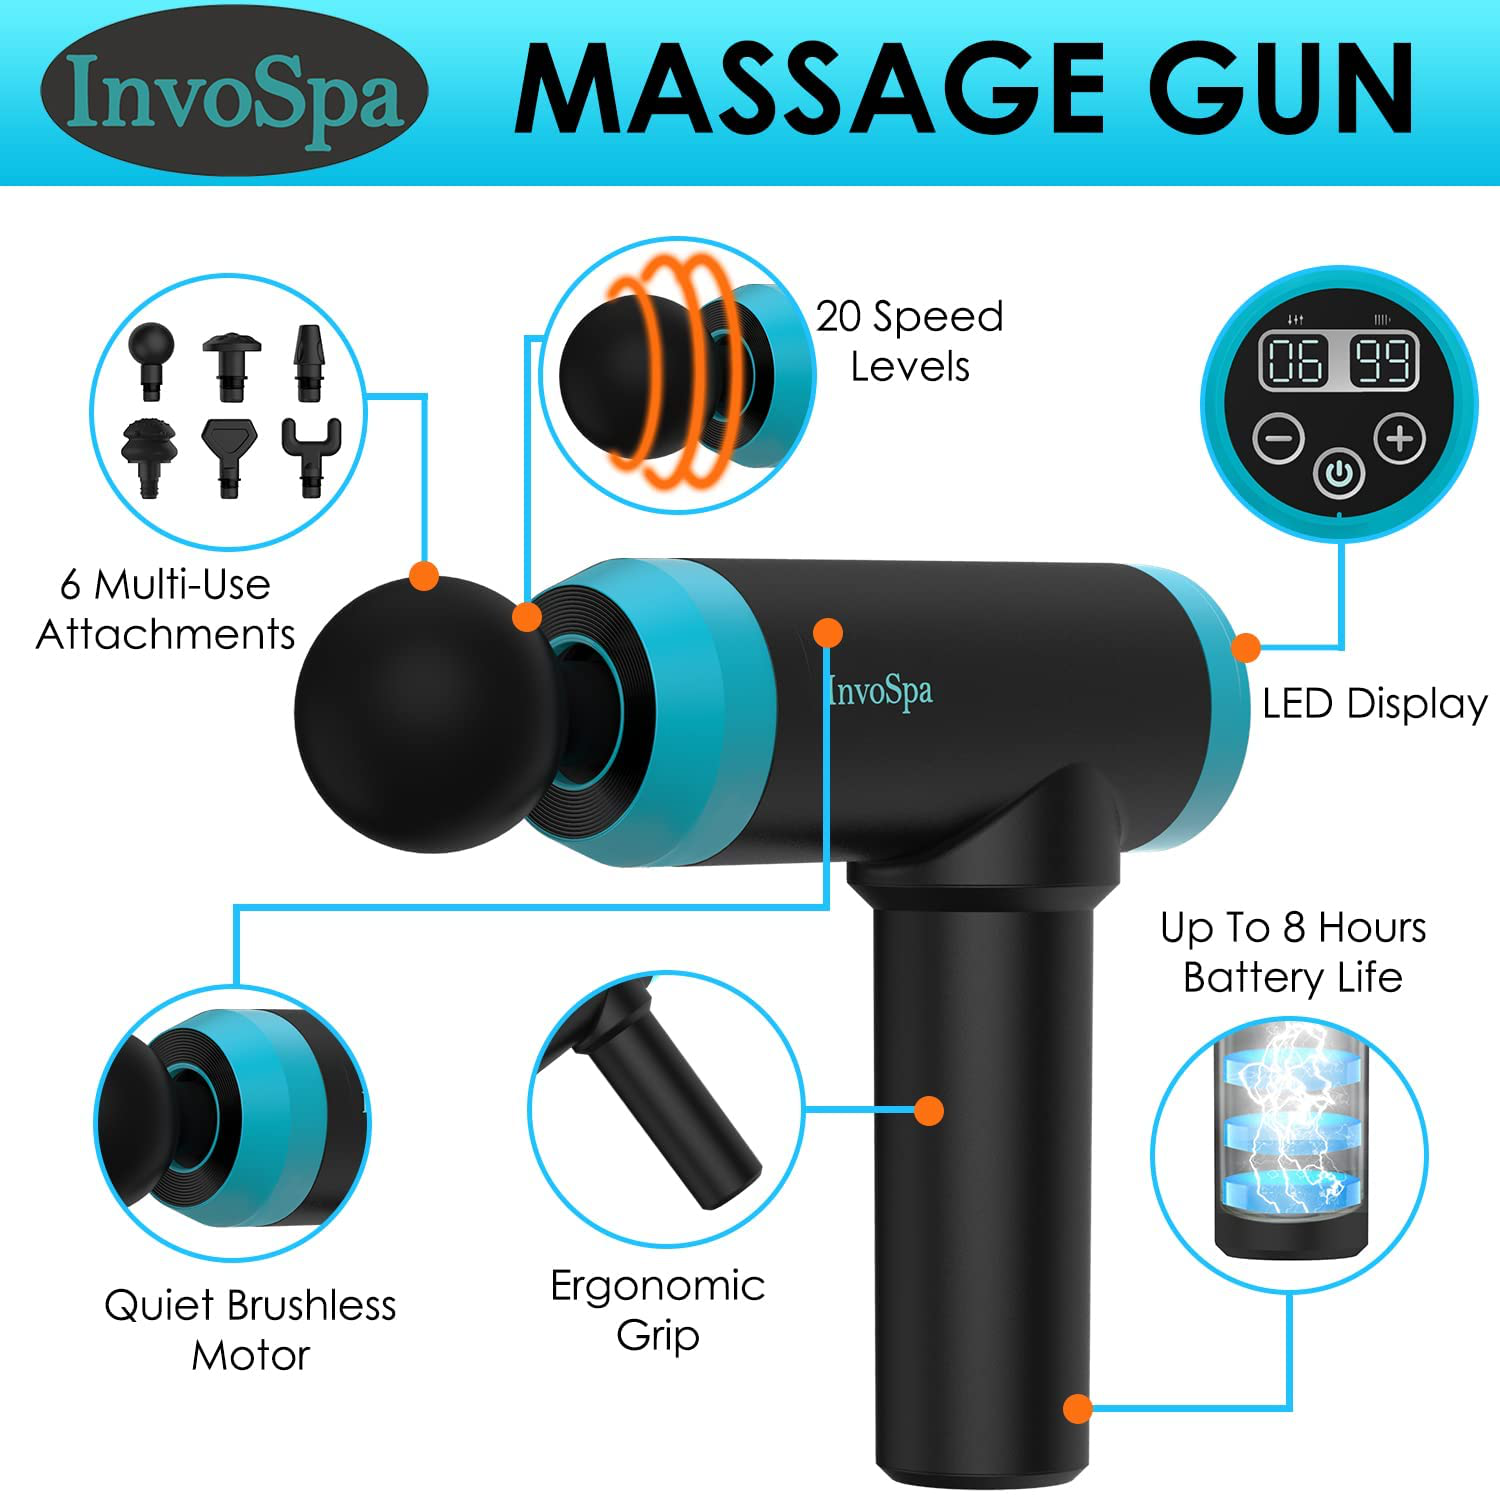 Muscle Massage Gun for Athletes - Percussion Handheld Deep Tissue Back Massager for Sore Muscle Pain Relief & Recovery - Percussive Portable Electric Body Massager Sports Drill - Massager Gun Gift